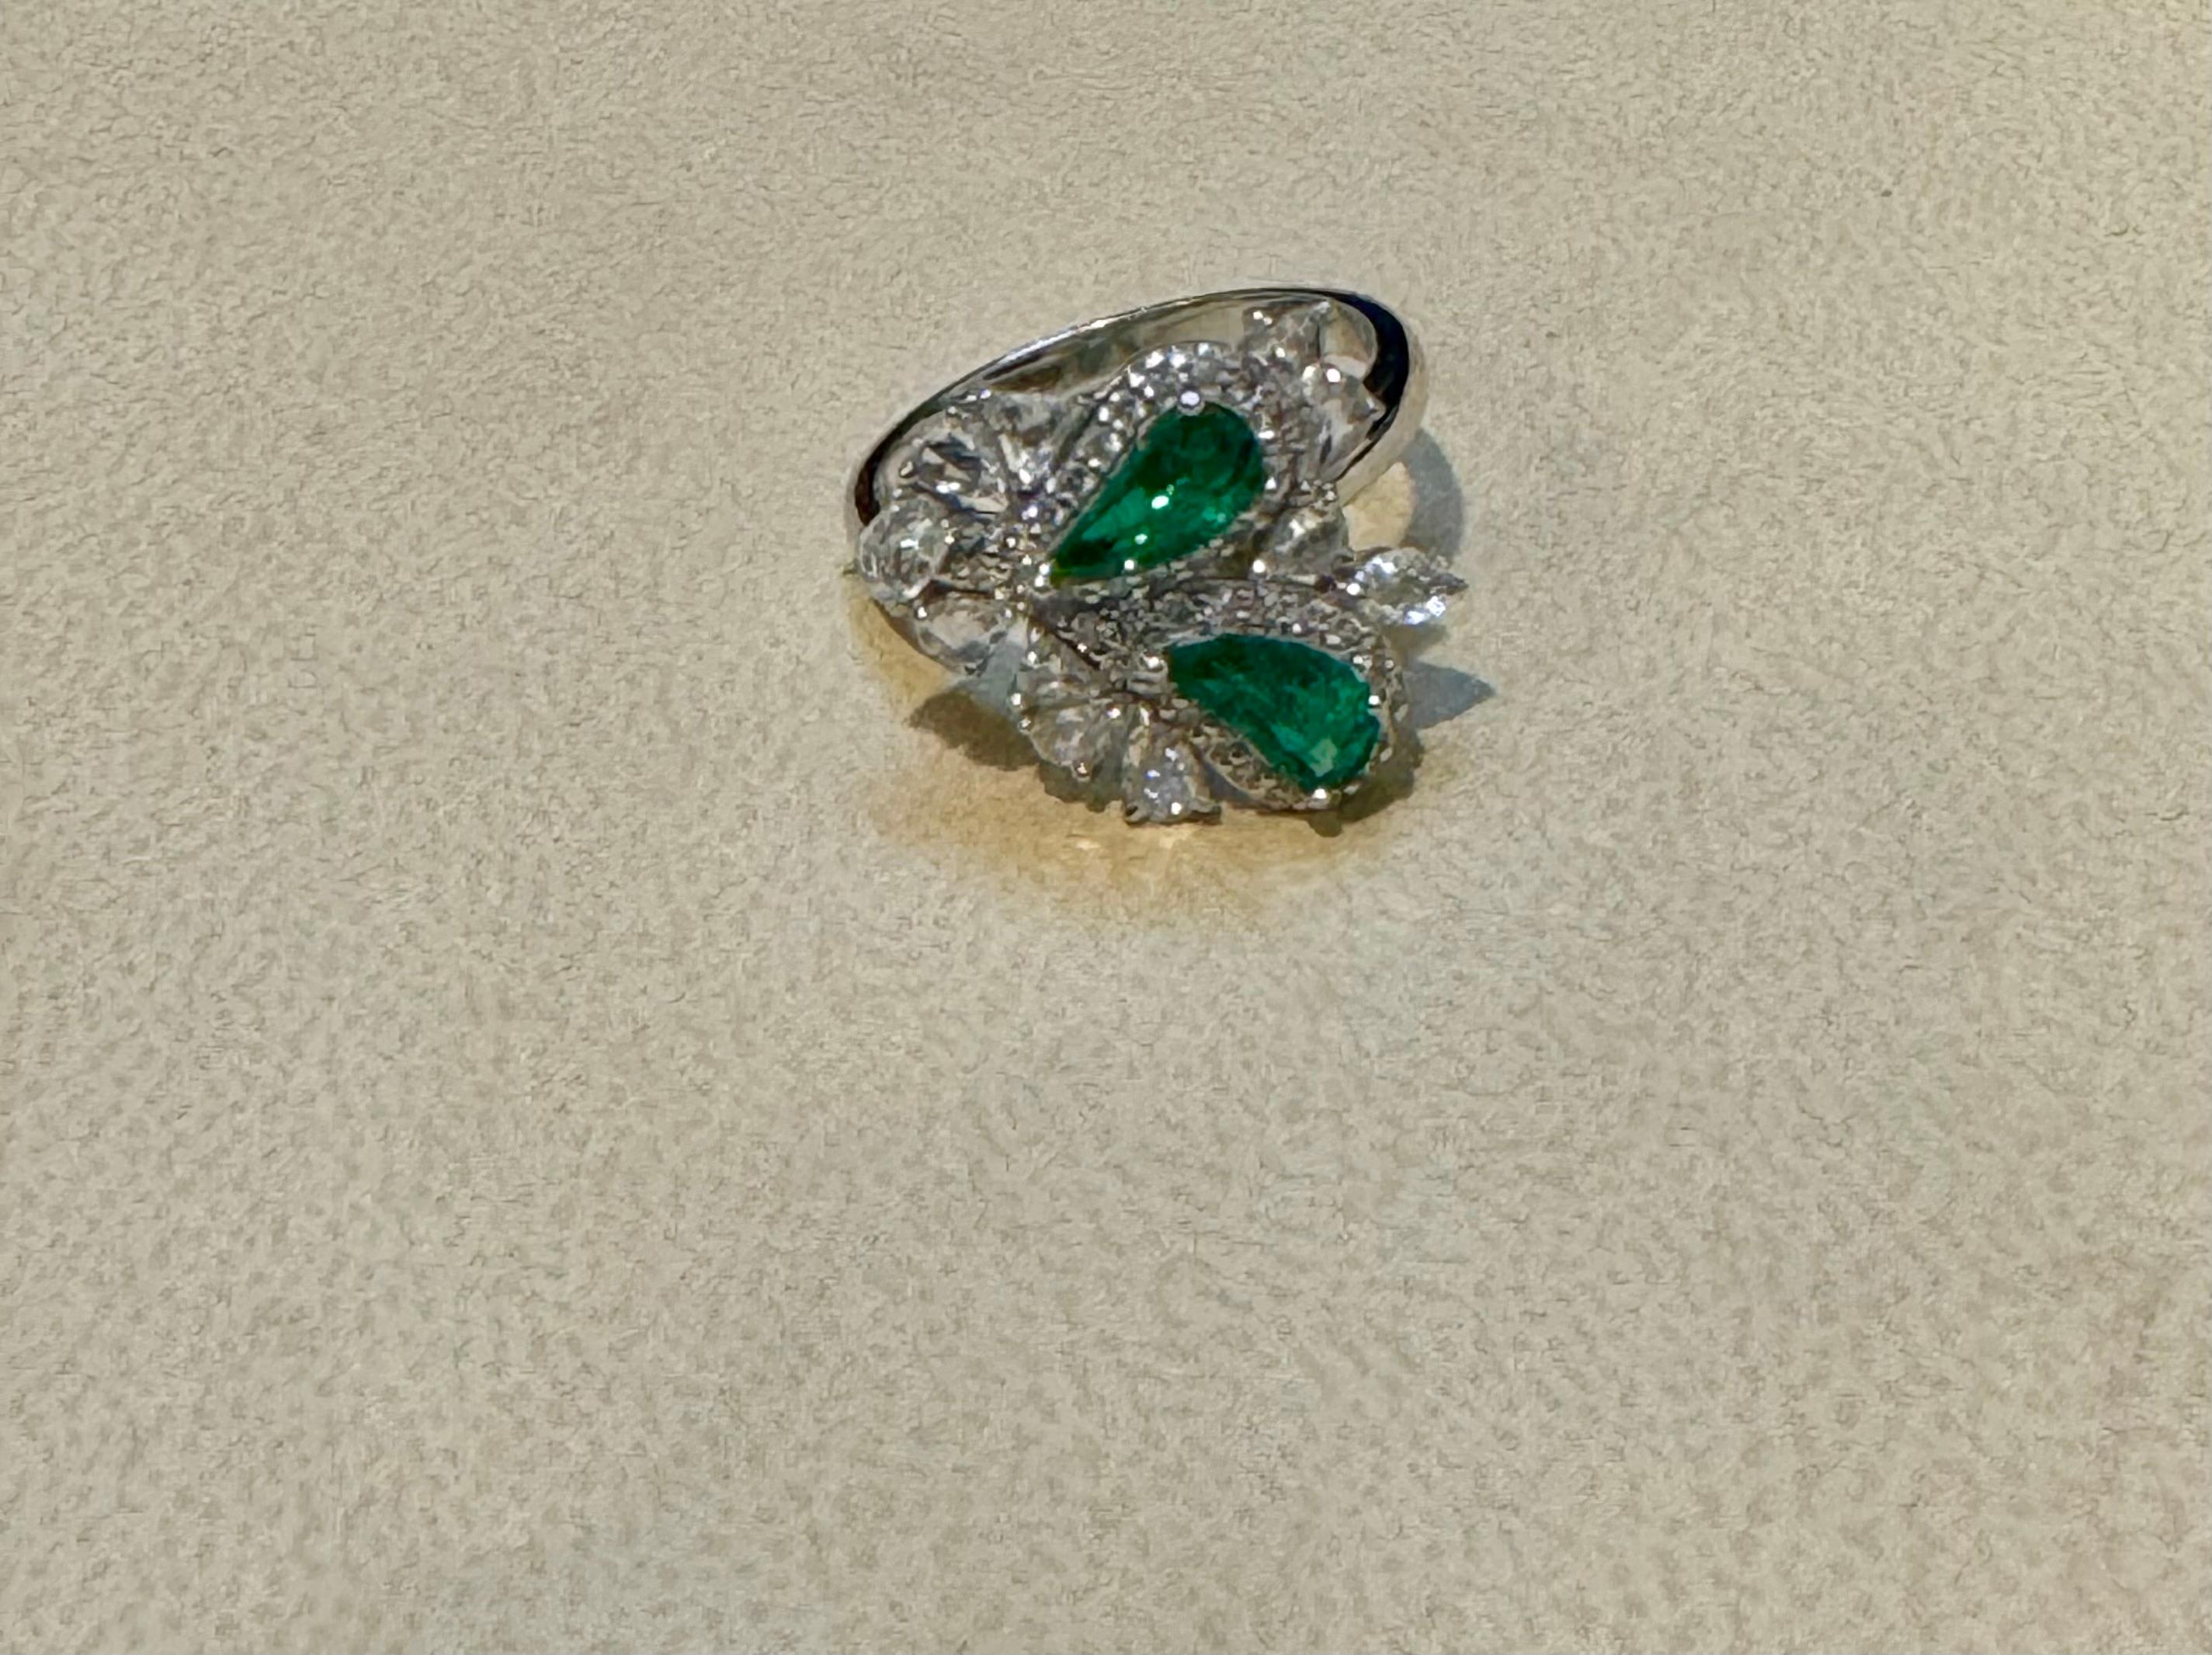 1.2Ct Finest Zambian Fancy pear  Emerald & 1.3Ct Diamond Ring, 18 Kt Gold ,  size 7
 This classic ring features a two fancy pear cut Zambian emerald of extreme fine quality, boasting a desirable color and luster, originating from Zambia. Accompanied